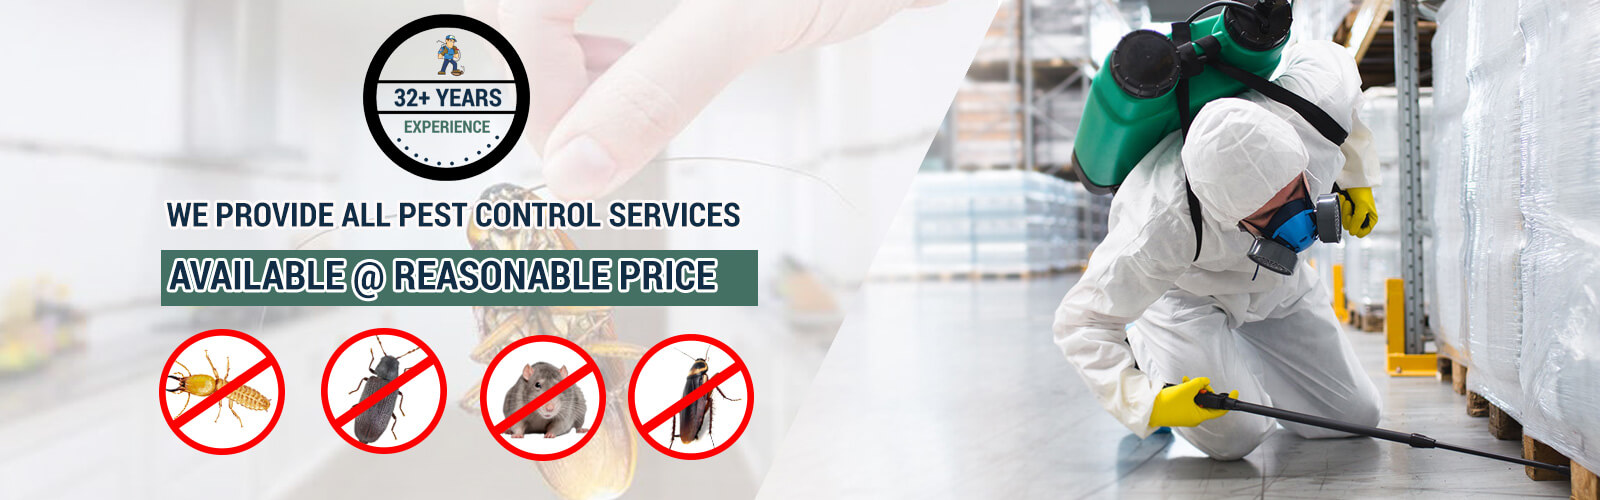 pest control services nearby